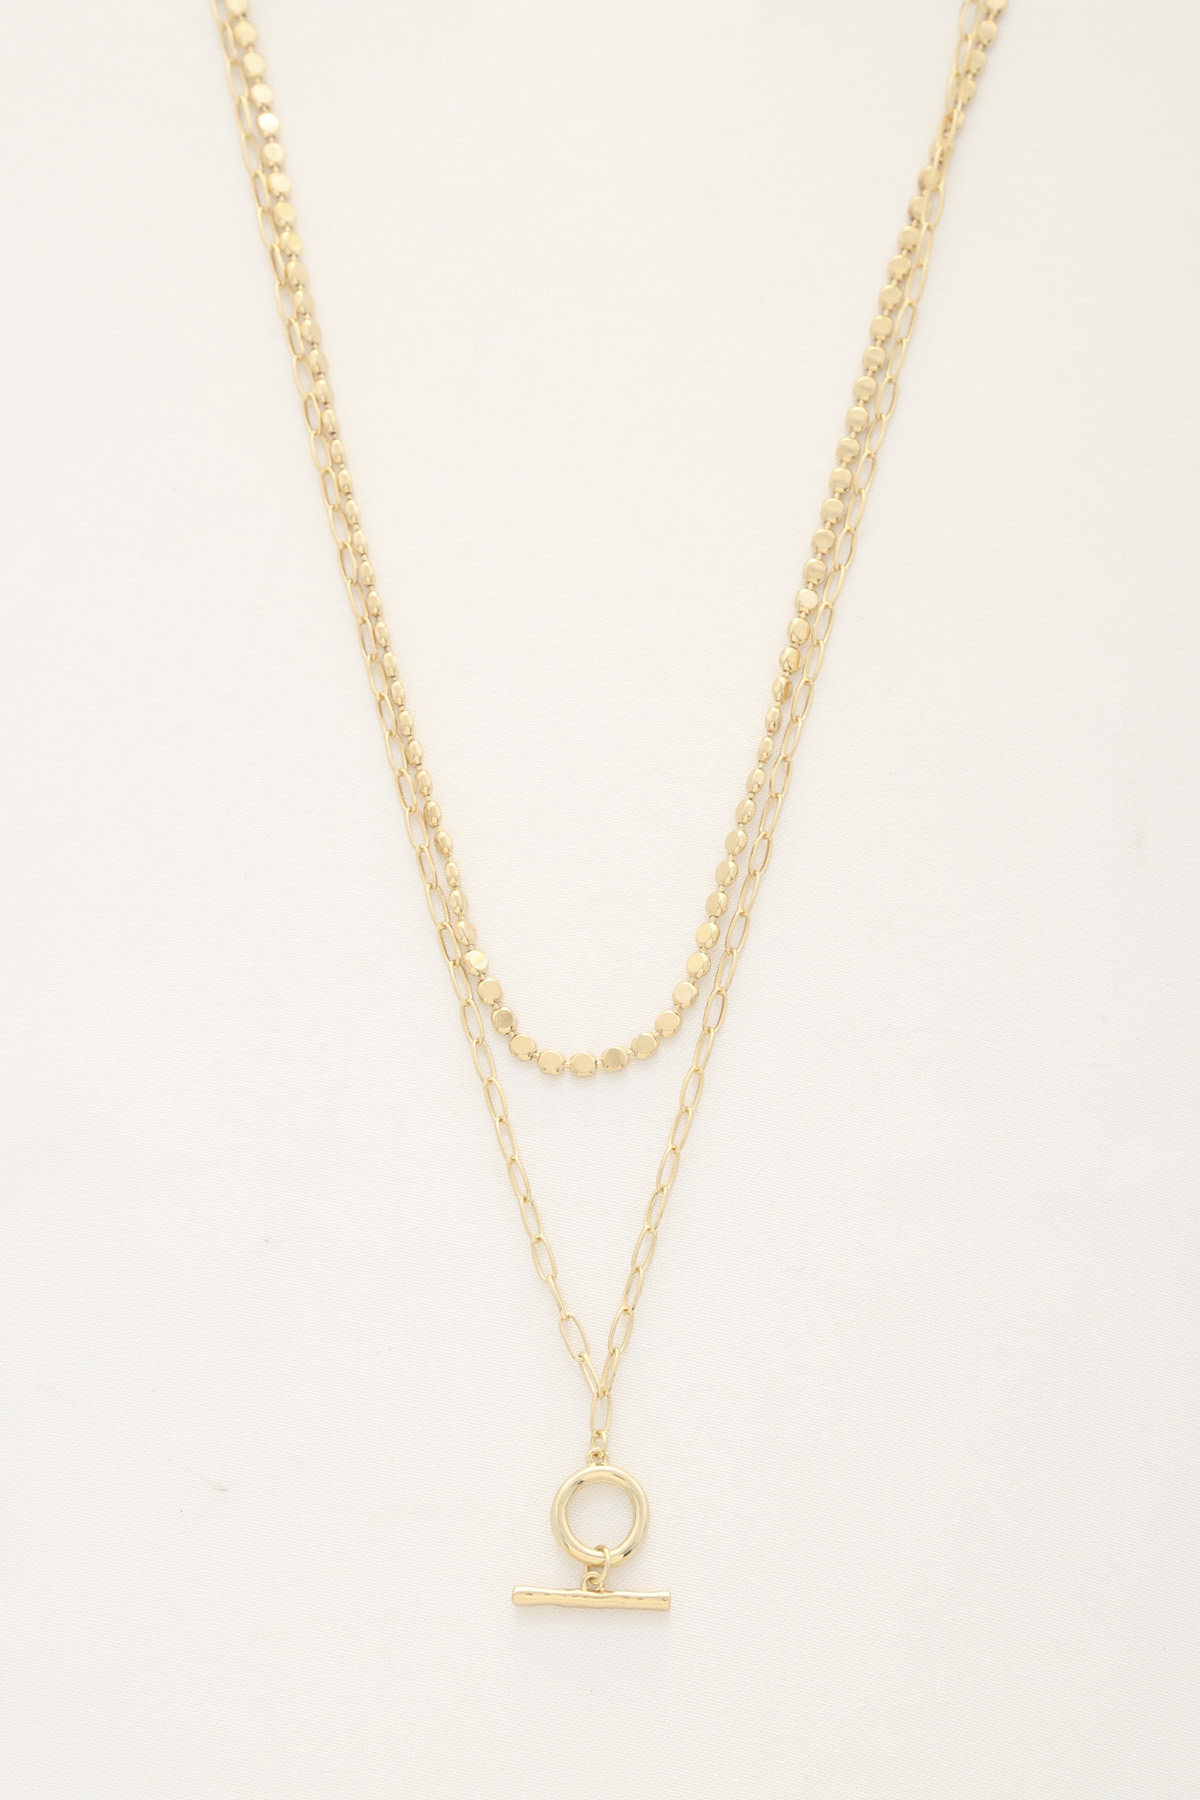 TOGGLE CLASP PAPER CLIP LINK LAYERED NECKLACE